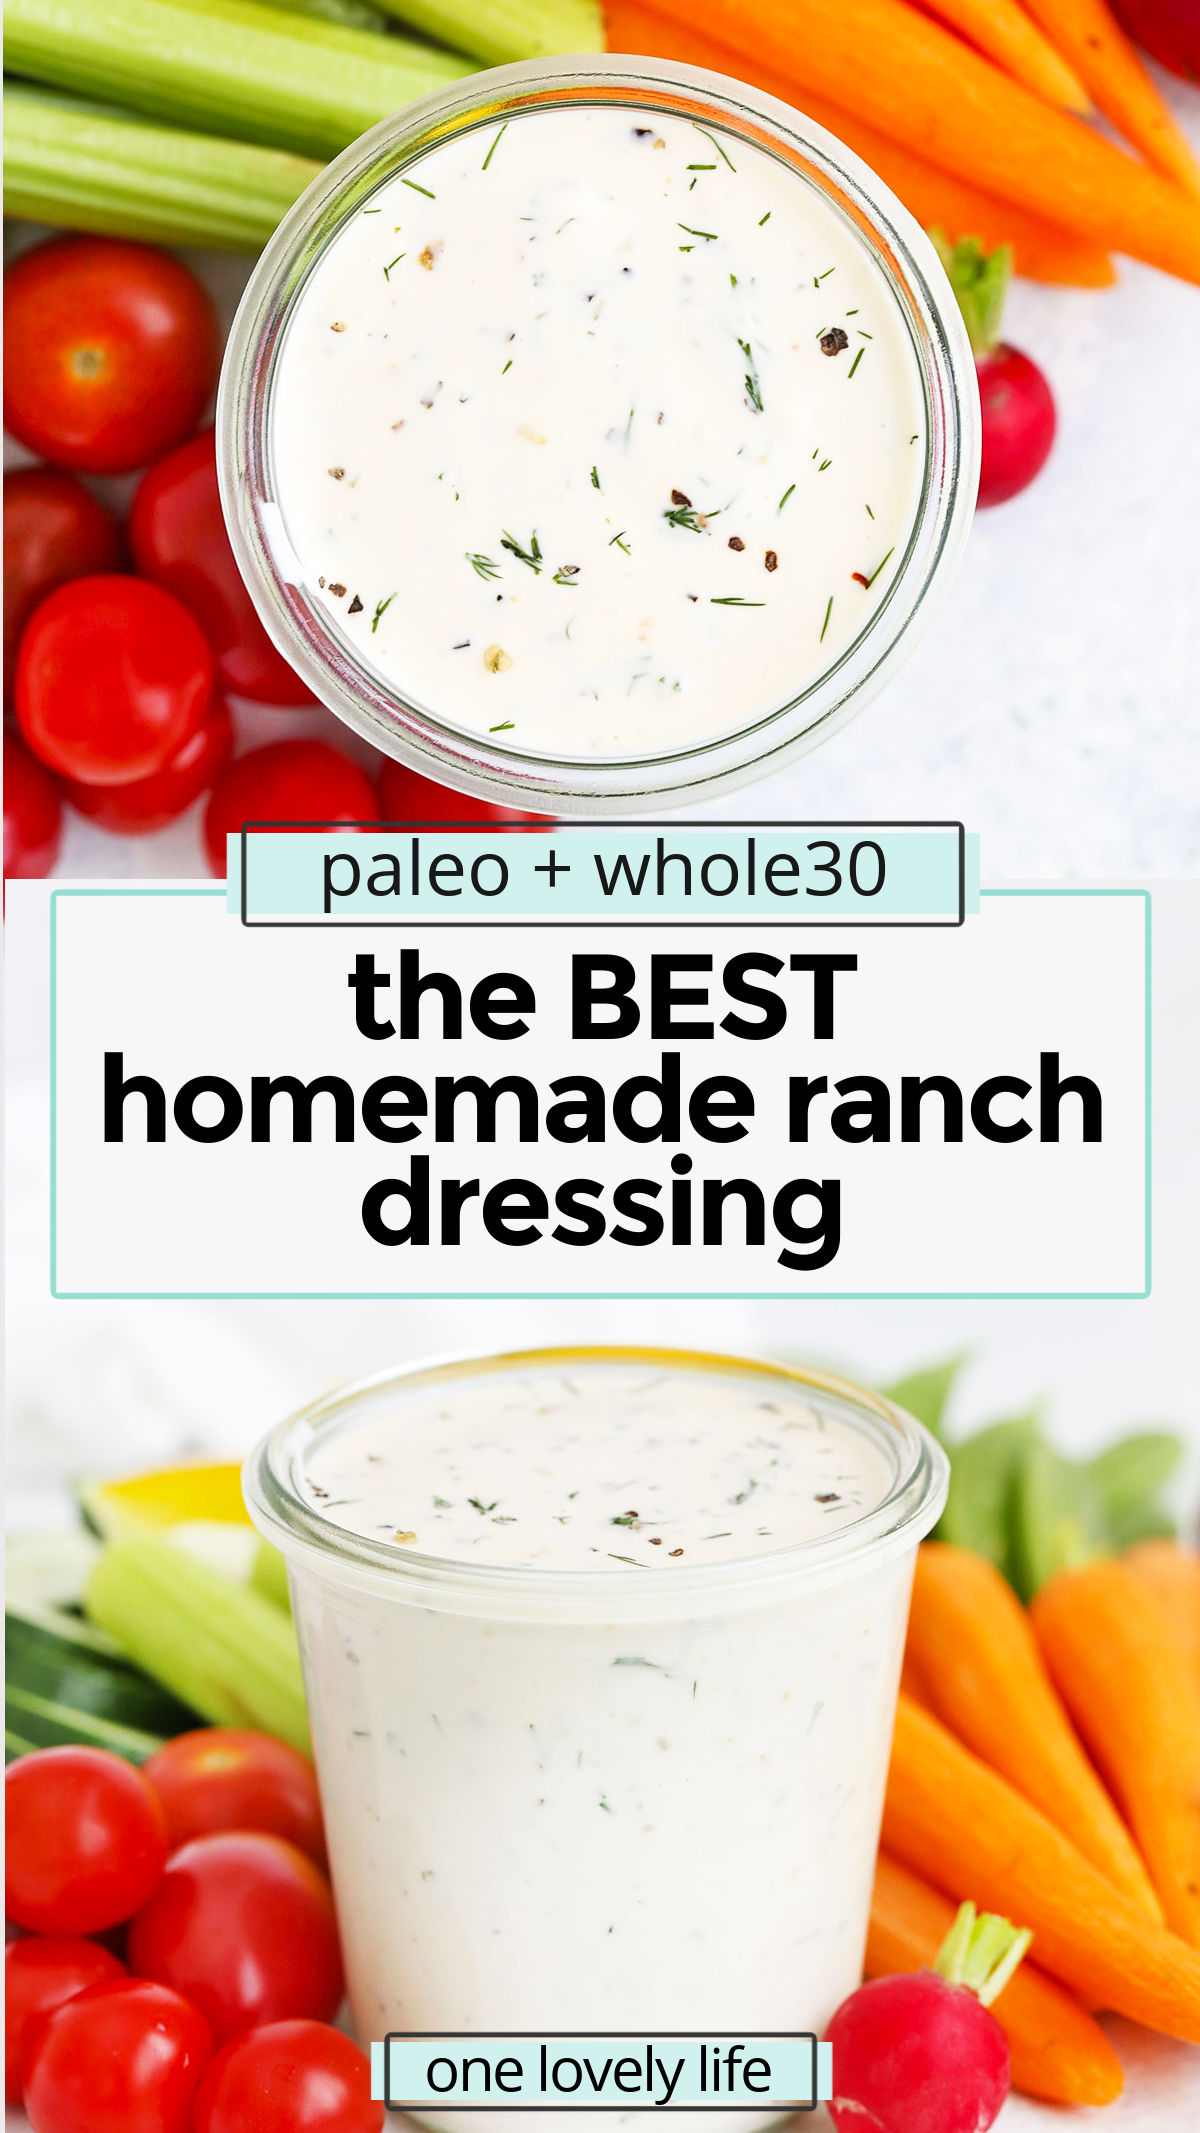 The BEST Paleo Ranch Dressing - This easy paleo ranch comes together in no time! Dairy free, gluten free, paleo and keto approved! // homemade ranch dressing recipe // dairy-free ranch dressing recipe // dump ranch // keto ranch dressing // paleo dump ranch dressing // whole30 dump ranch // easy ranch dressing // ranch dressing recipe no seasoning mix // healthy ranch dressing